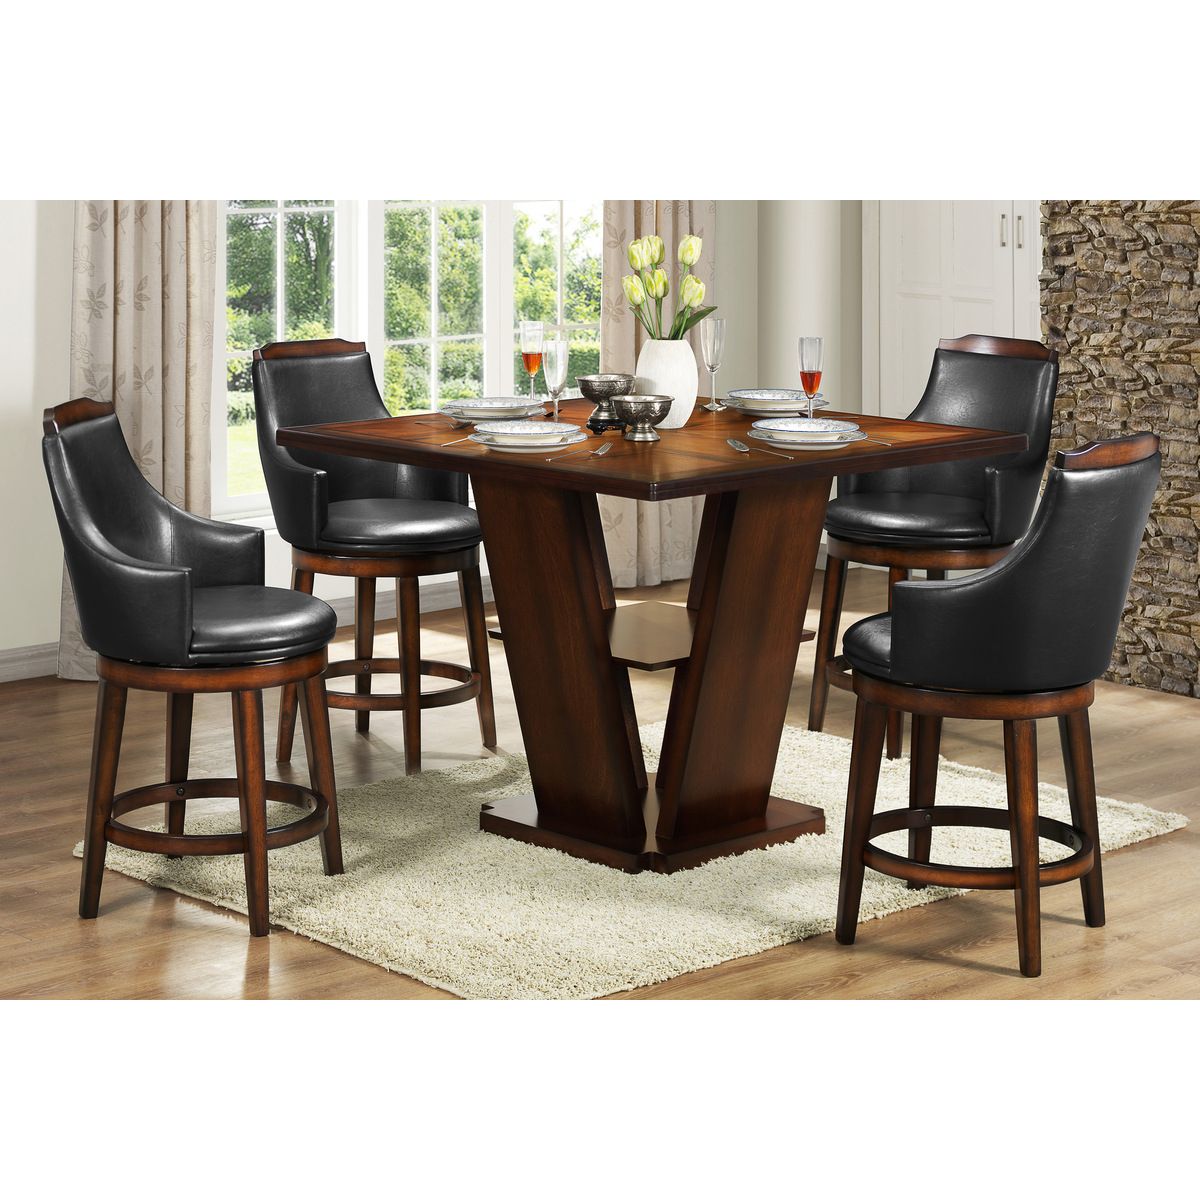 Barra Bar Height Pedestal Dining Tables Pertaining To 2019 5447 36* Counter Height Table With Storage Base (View 13 of 20)